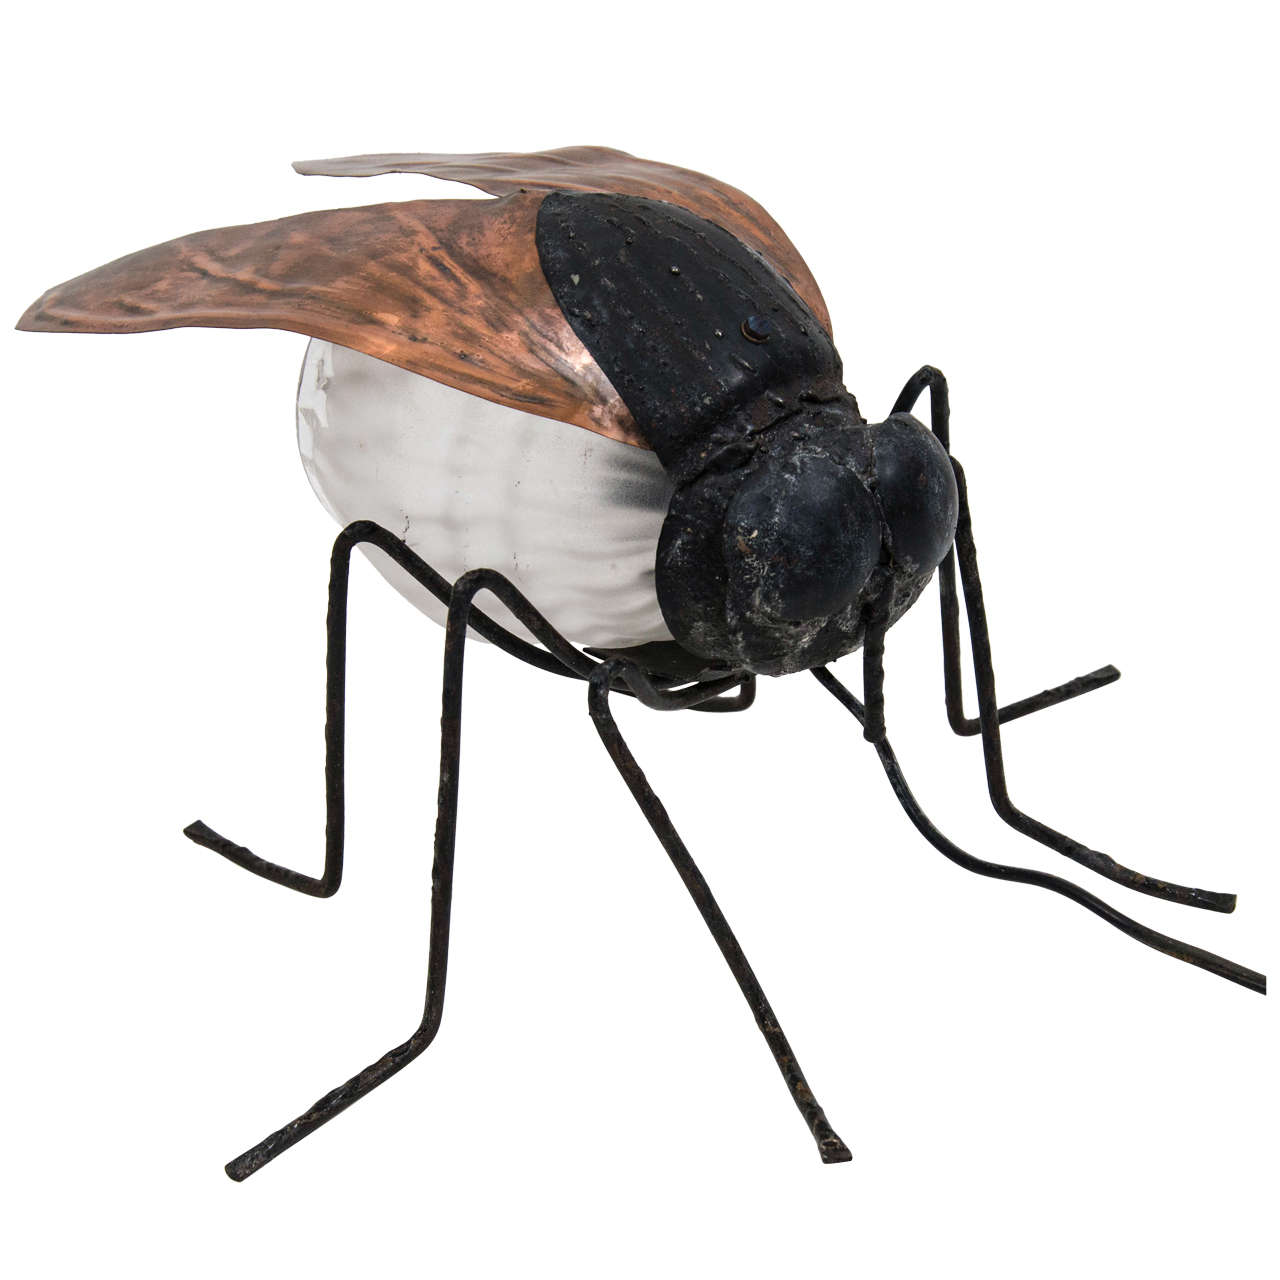 Housefly Lamp For Sale